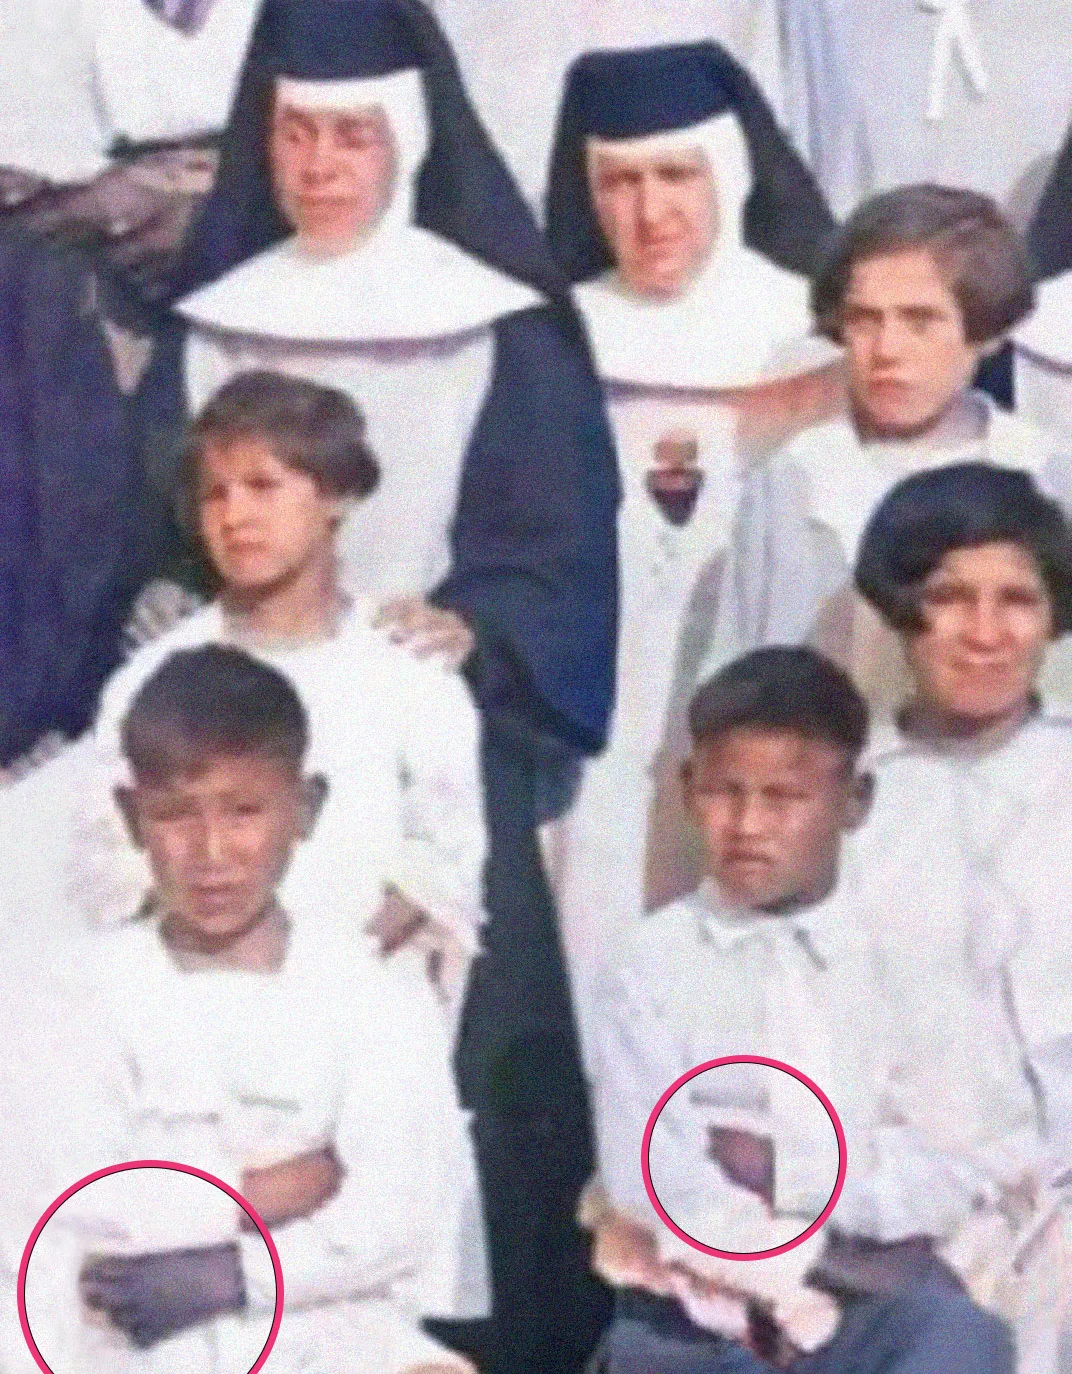 Students posing with nuns have their left hands tied. The hands are visibly purple.